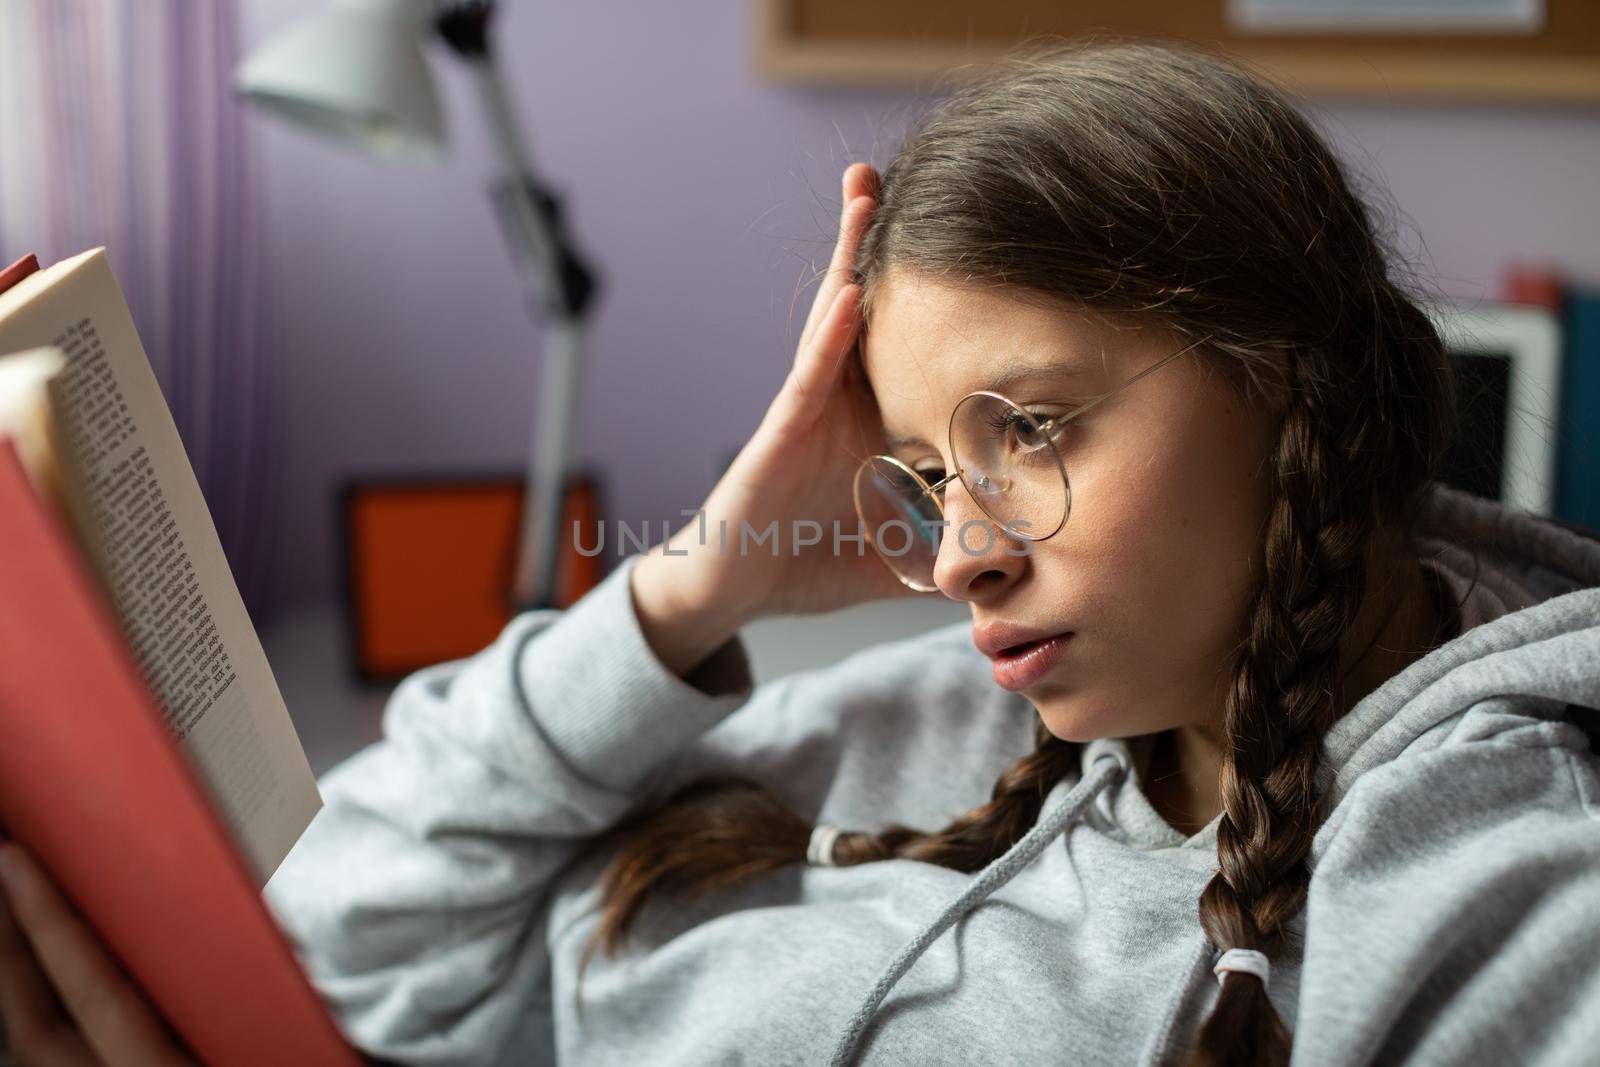 A schoolgirl is reading a highly engaging adventure book. The brunette has her glasses on and her hair styled in two braids. Book lover.